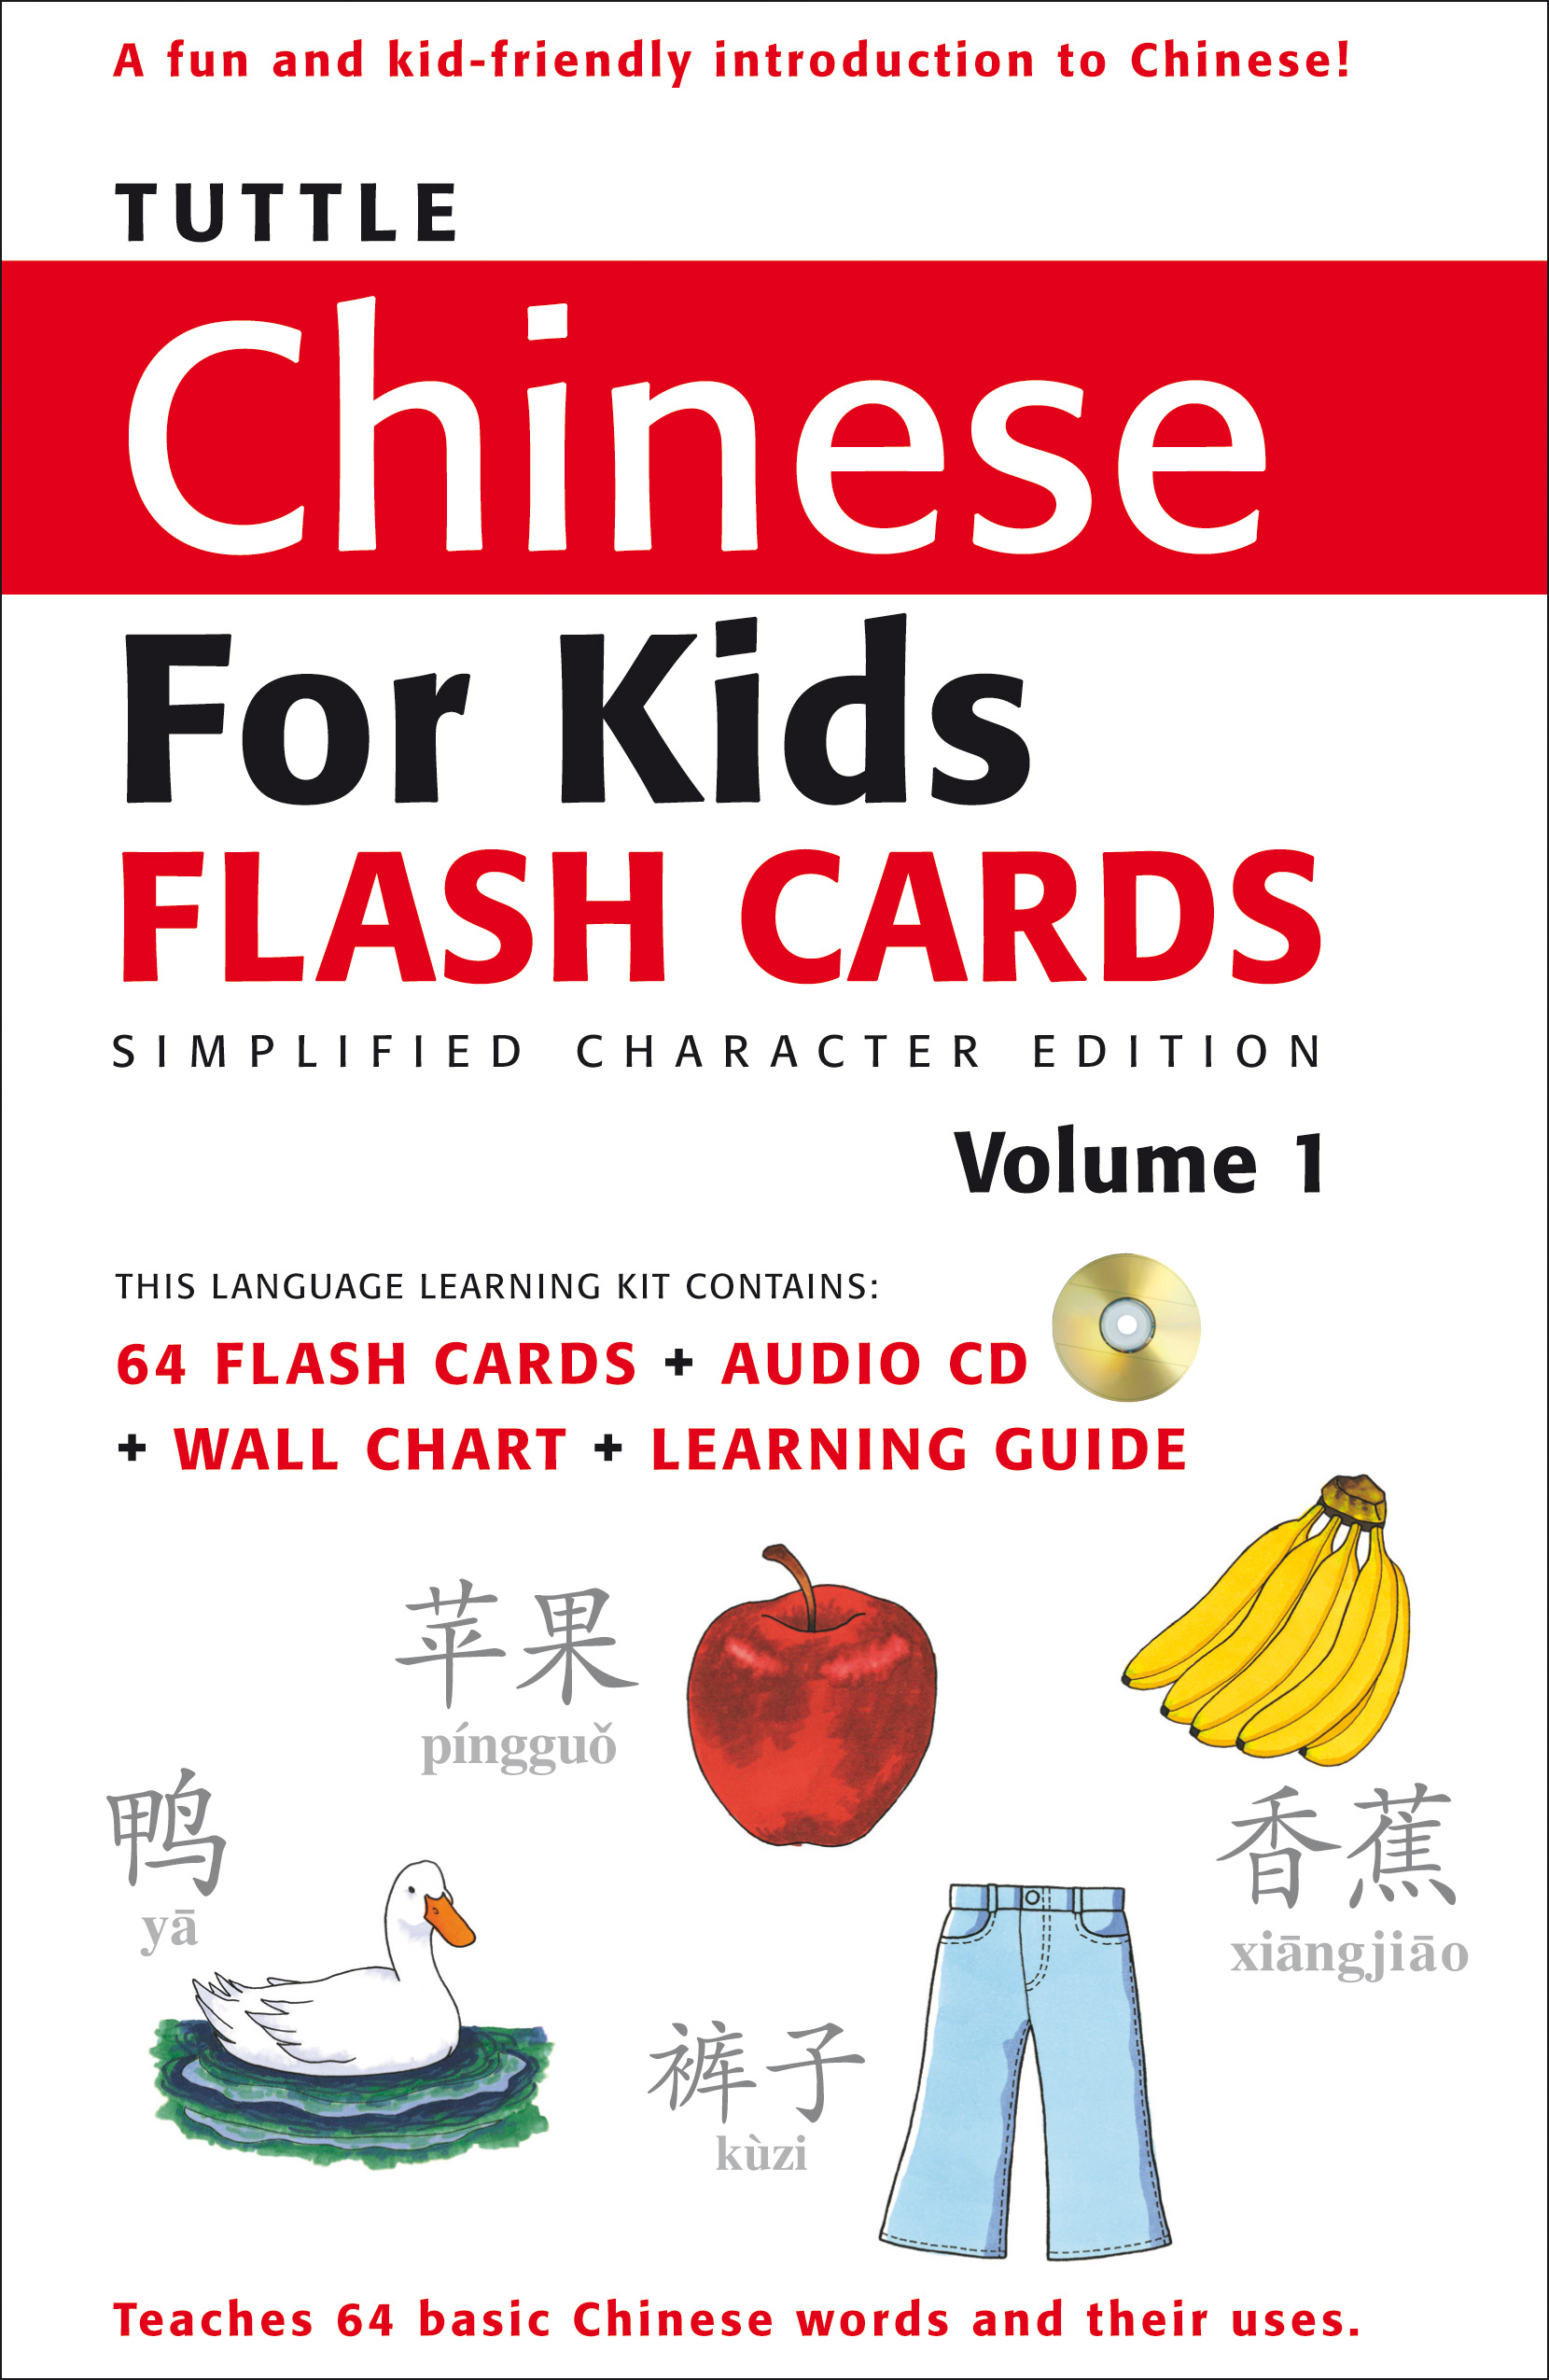 Tuttle Chinese for Kids Flash Cards Kit Vol 1 Simplified Edition Audio